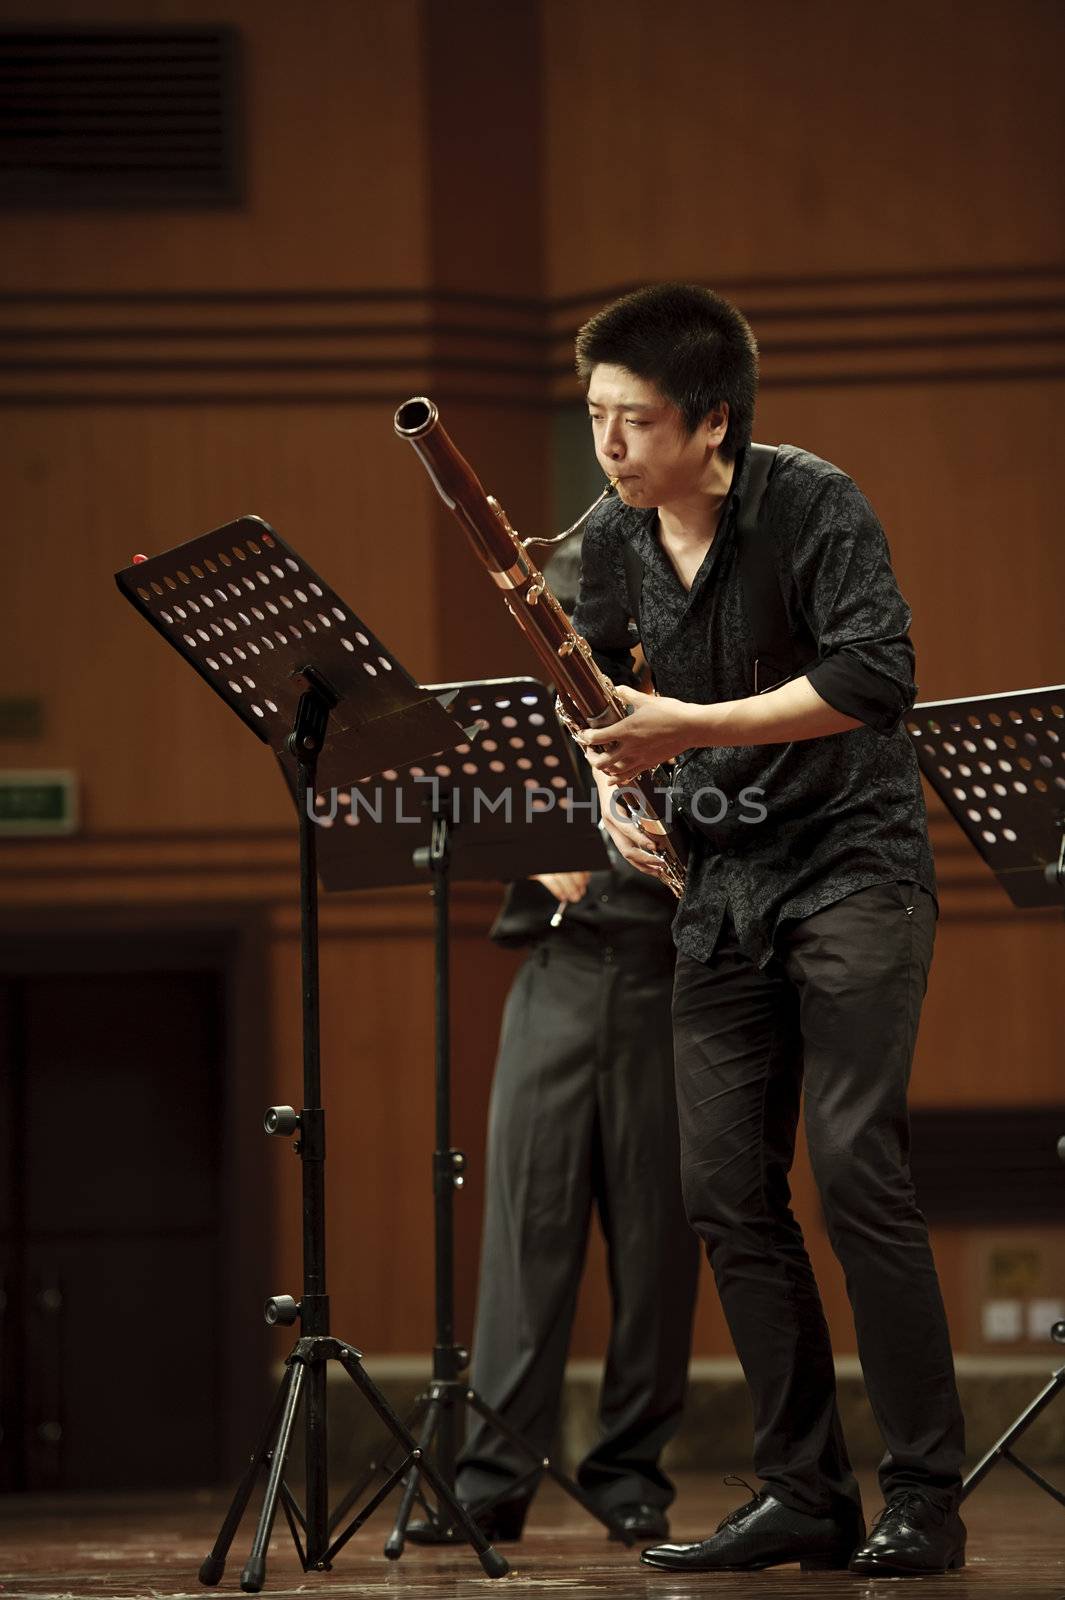 CHENGDU - JUN 20: bassoonist perform on wind music chamber music concert at odeum of Sichuan Conservatory of Music on Jun 20,2012 in Chengdu,China.